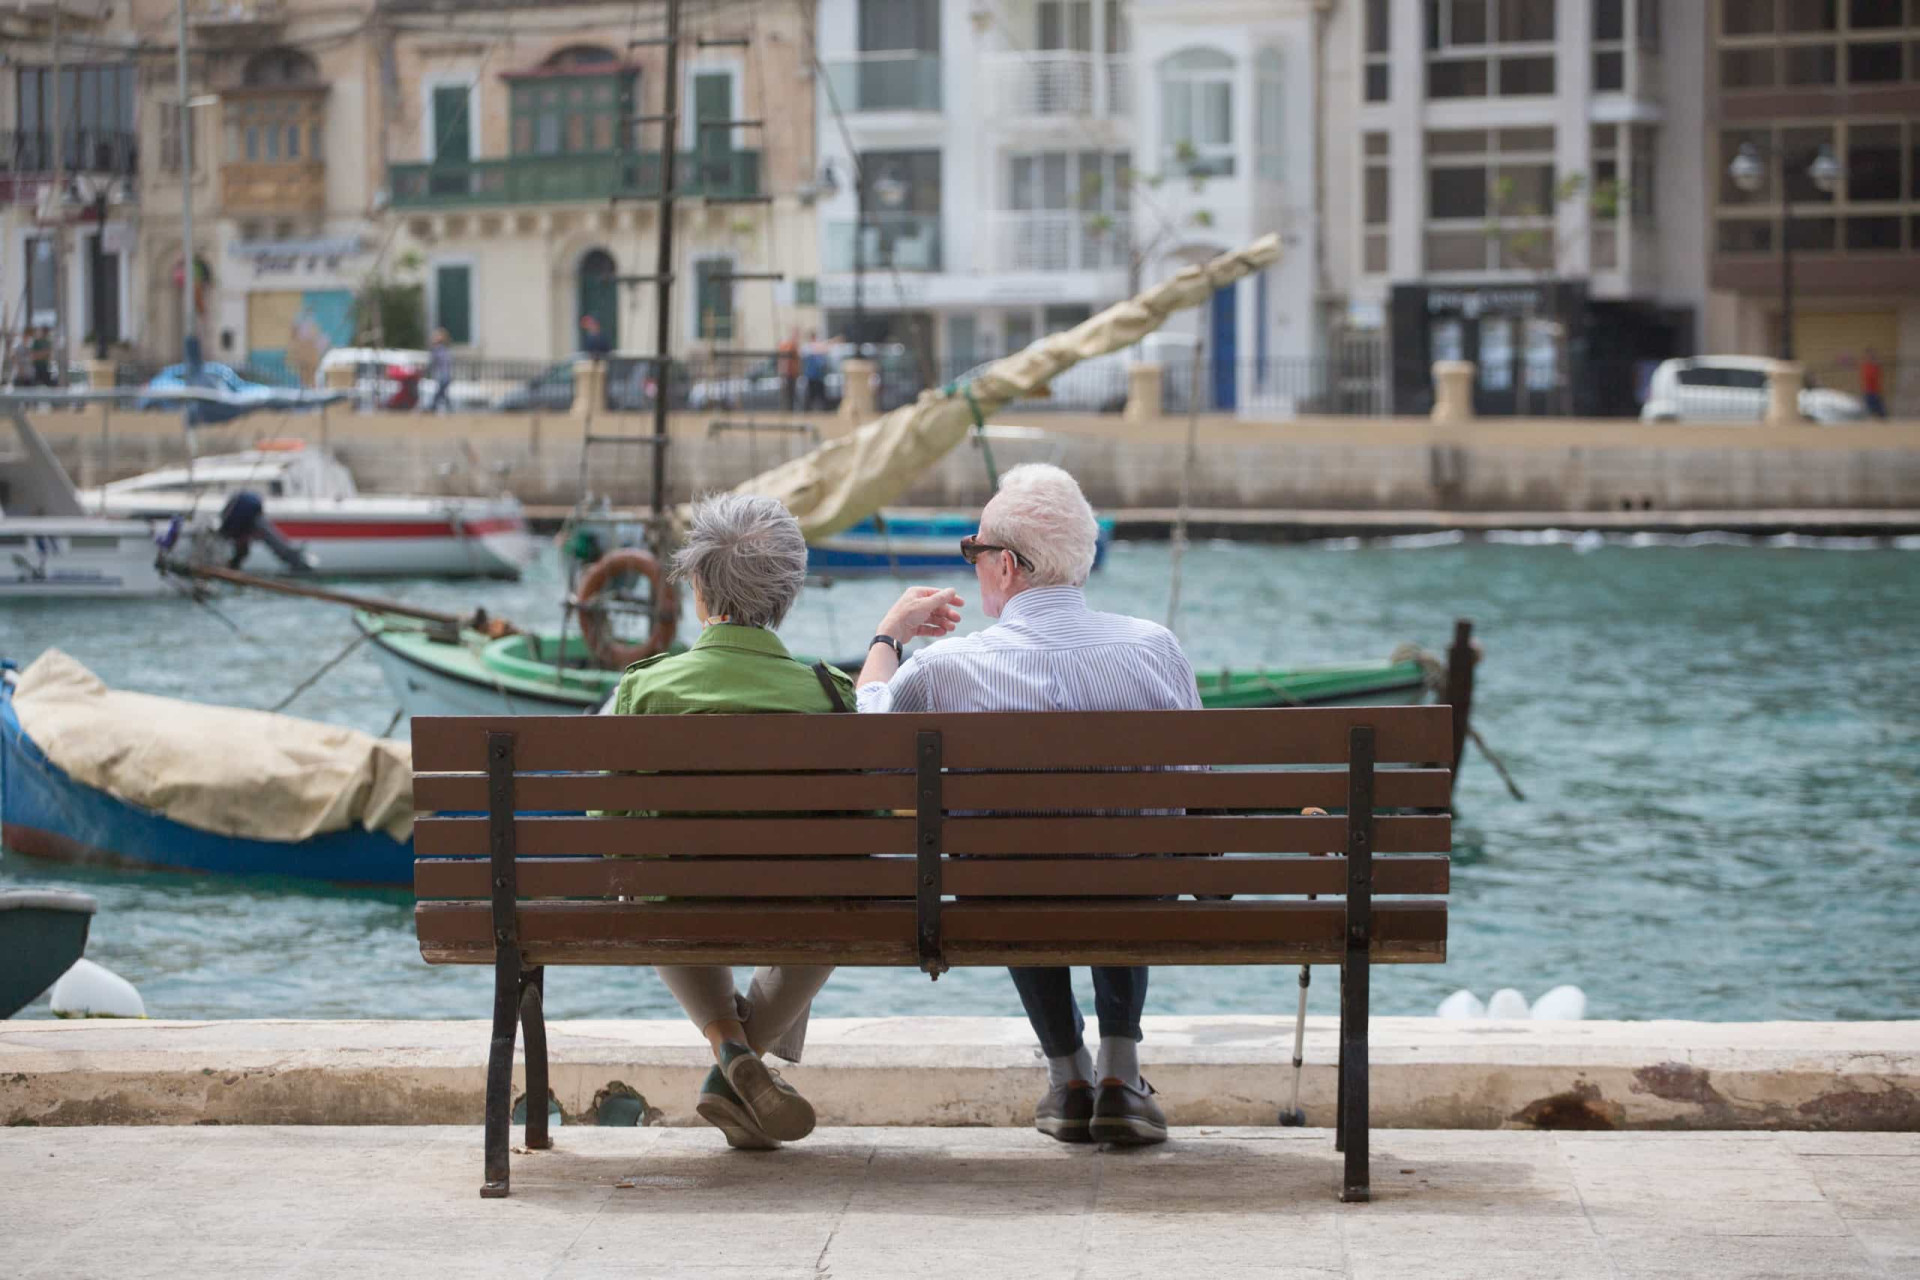 <p>Malta is considered to be one of the best places to retire. Besides all the aforementioned perks, a couple can live comfortably on the island for as little as US$2,600 a month.</p> <p>See also: <a href="https://uk.starsinsider.com/travel/294901/the-greatest-retirement-locations-in-the-world">The greatest retirement locations in the world</a></p><p><a href="https://www.msn.com/en-us/community/channel/vid-7xx8mnucu55yw63we9va2gwr7uihbxwc68fxqp25x6tg4ftibpra?cvid=94631541bc0f4f89bfd59158d696ad7e">Follow us and access great exclusive content every day</a></p>